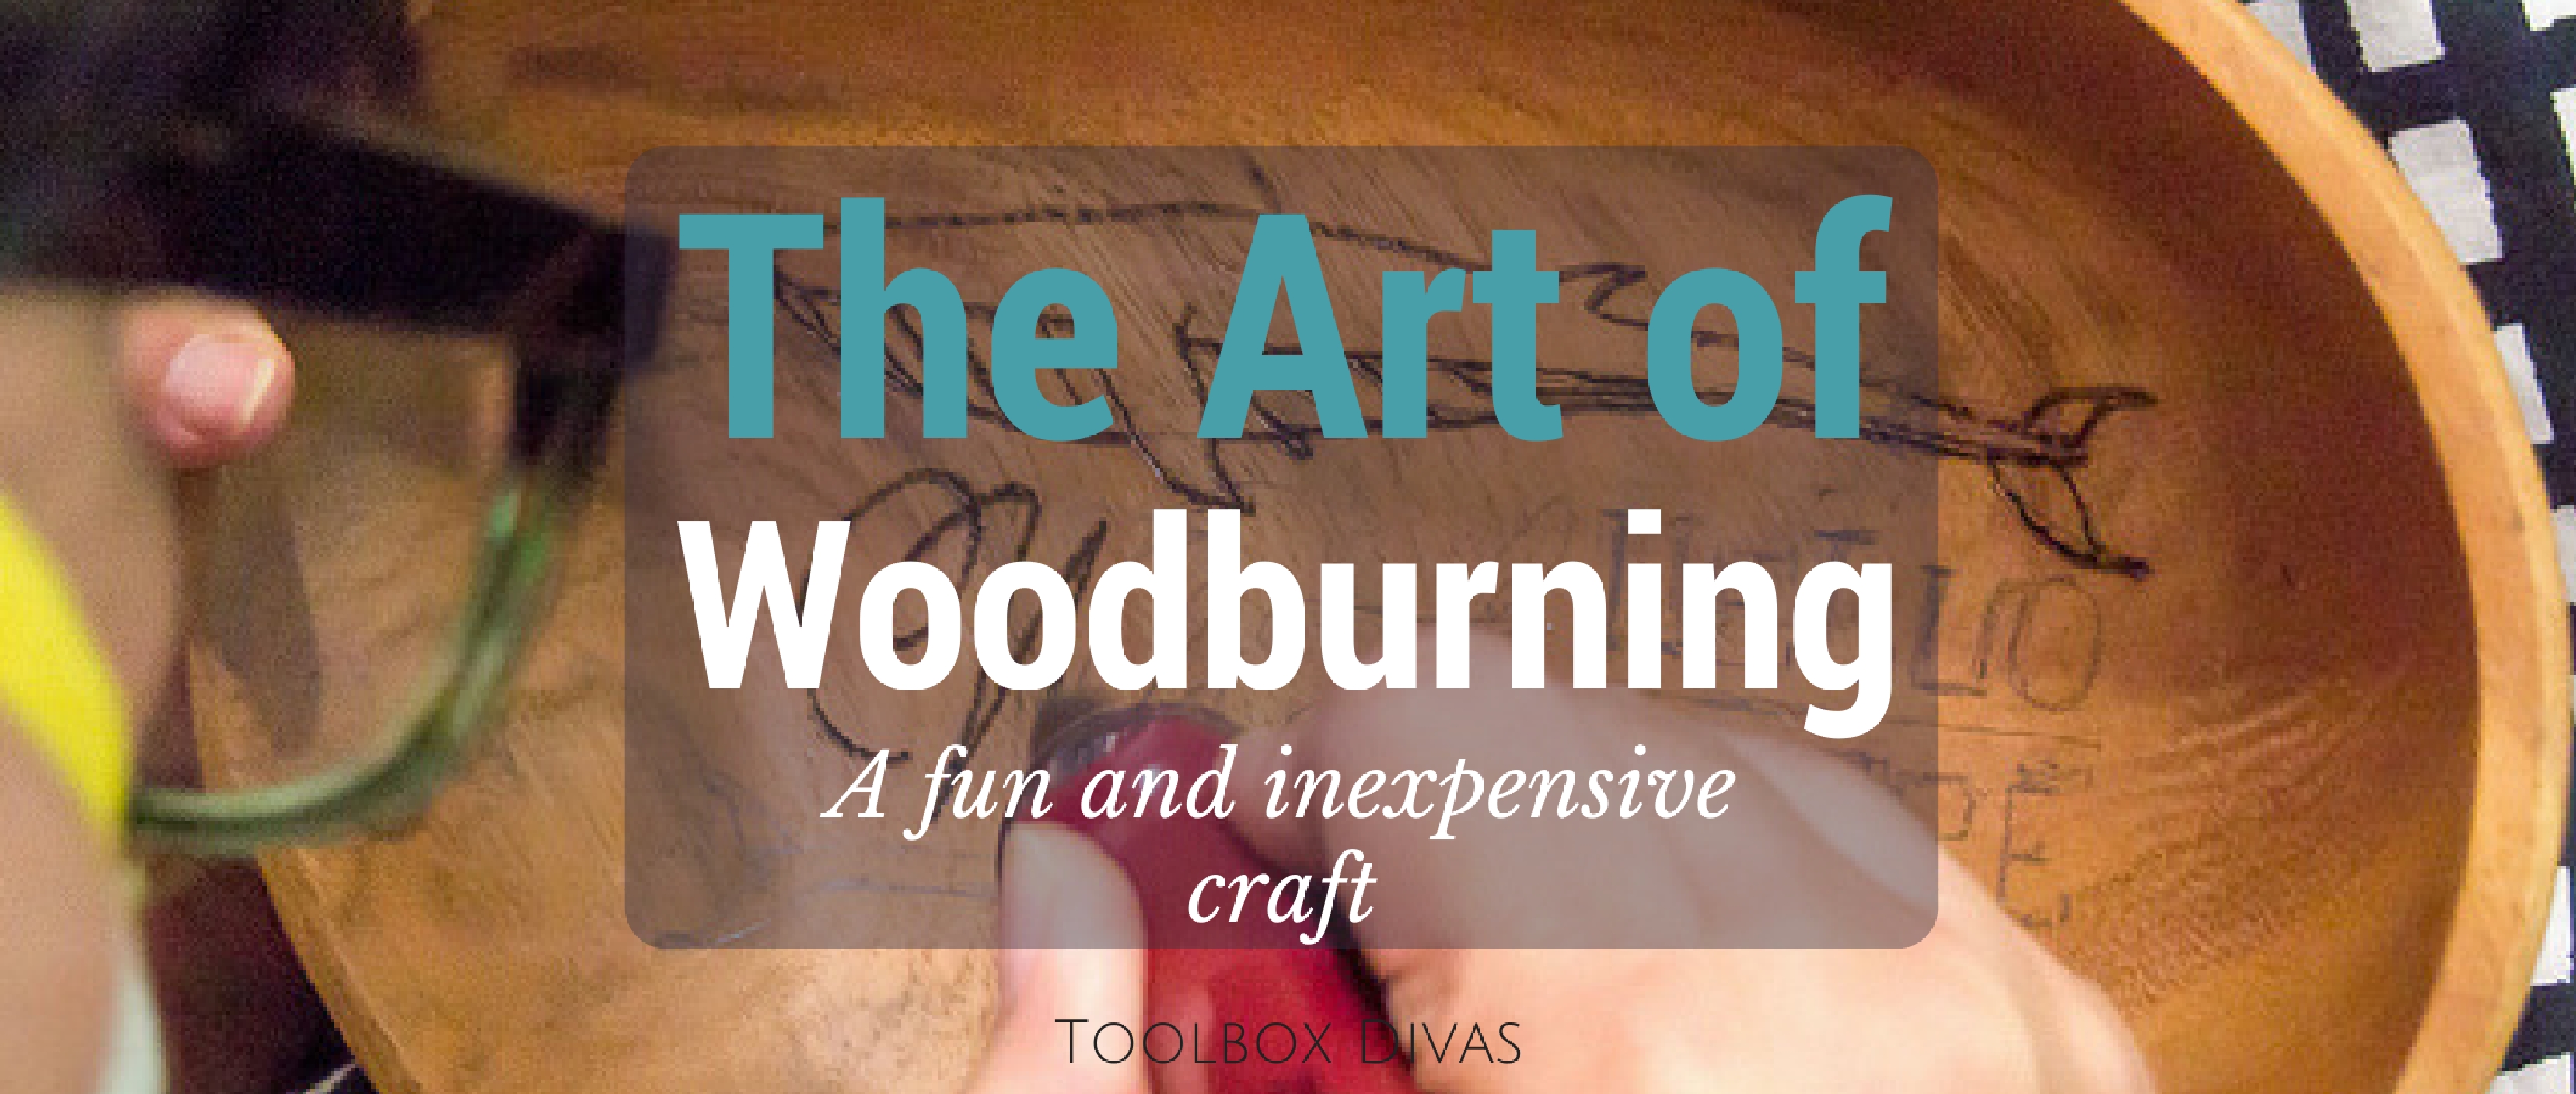 Discover the inexpensive Art of Woodburning